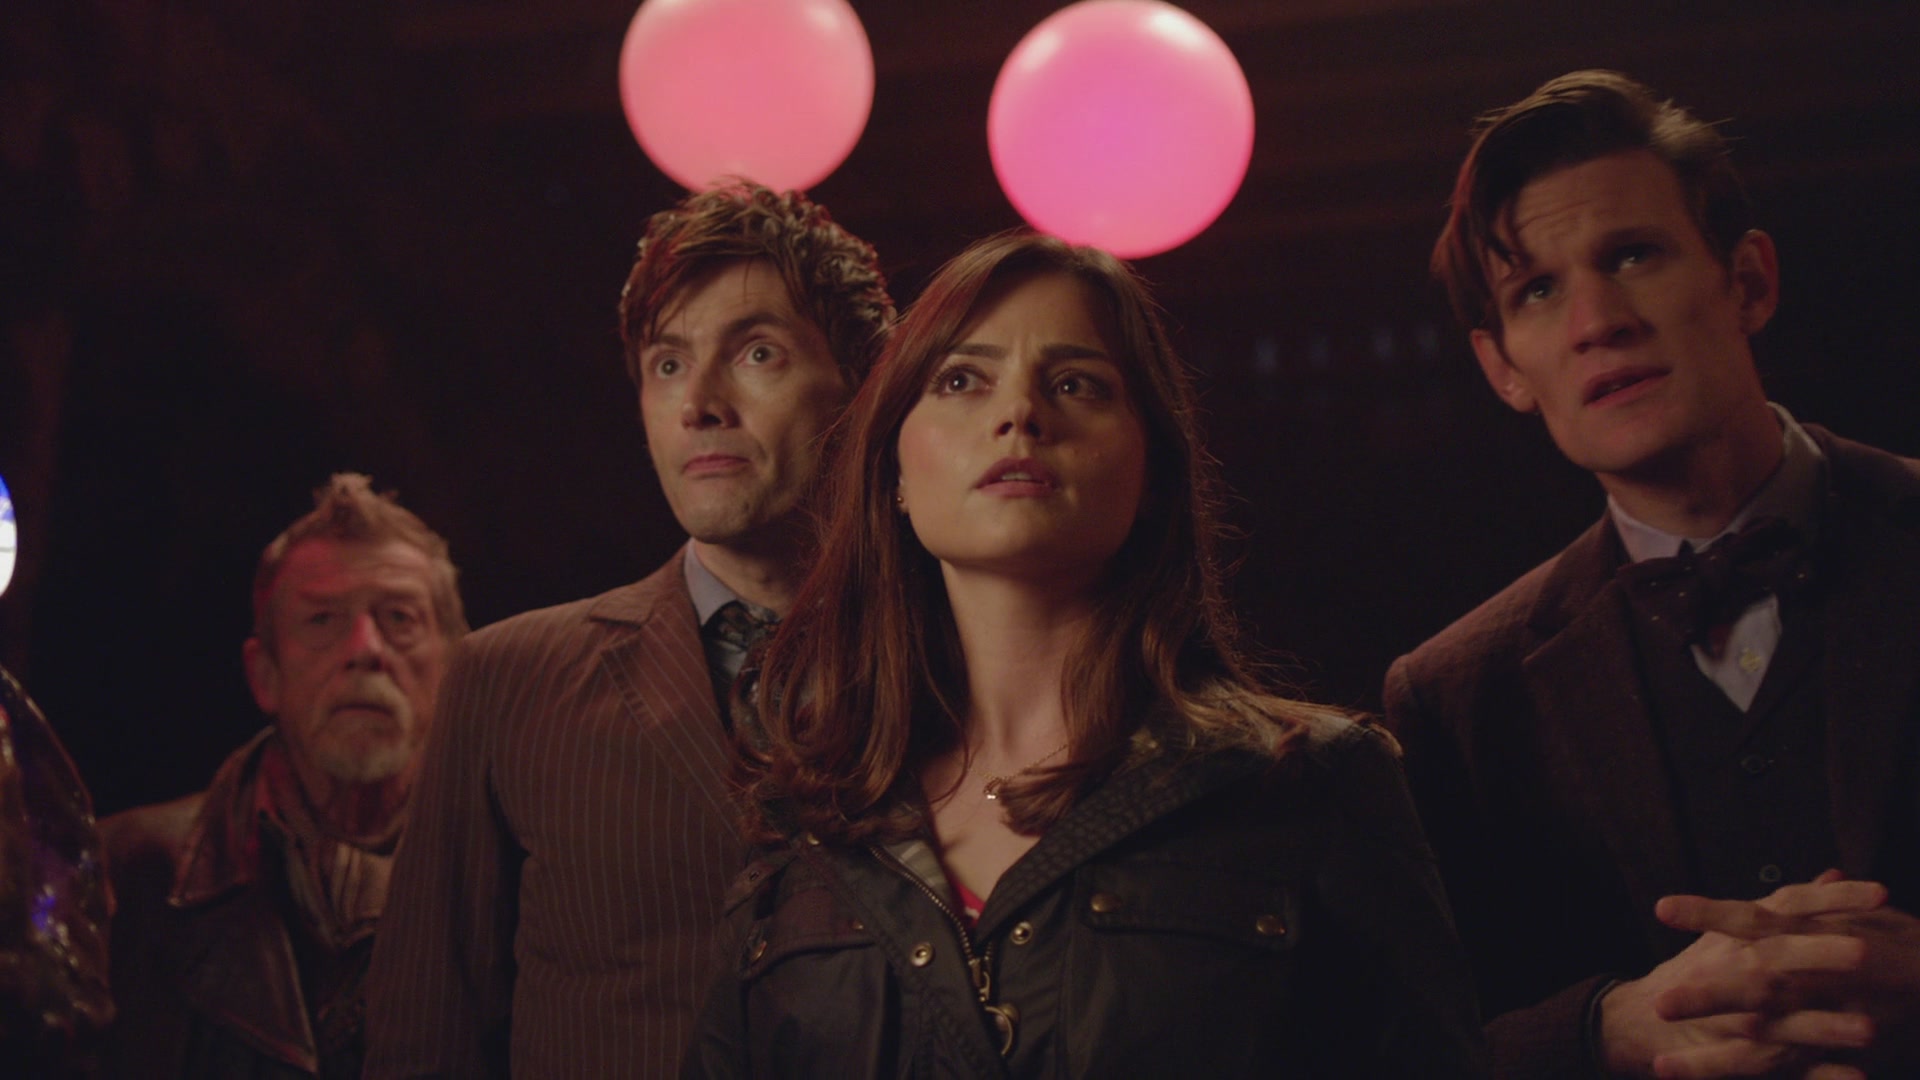 DayOfTheDoctor-Caps-0801.jpg